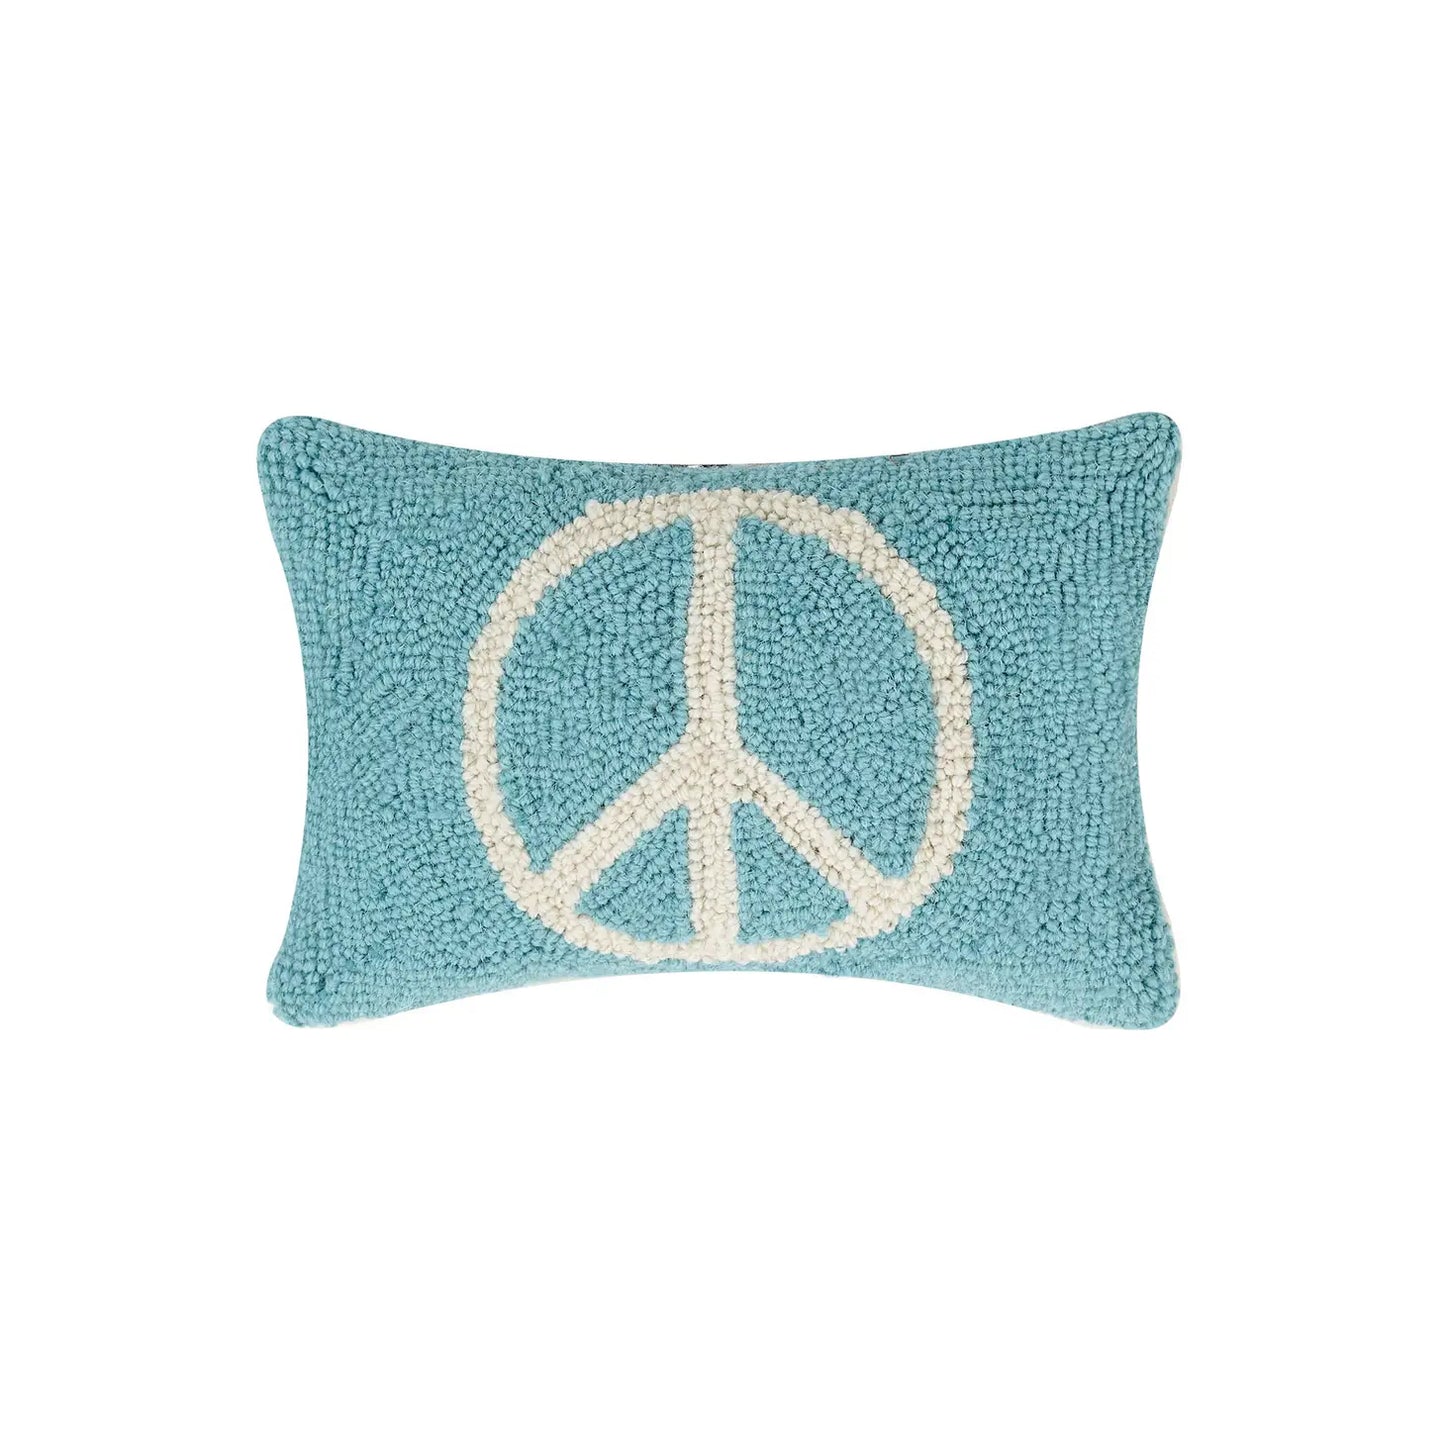 Peace Baby Small Cushion PRE ORDER